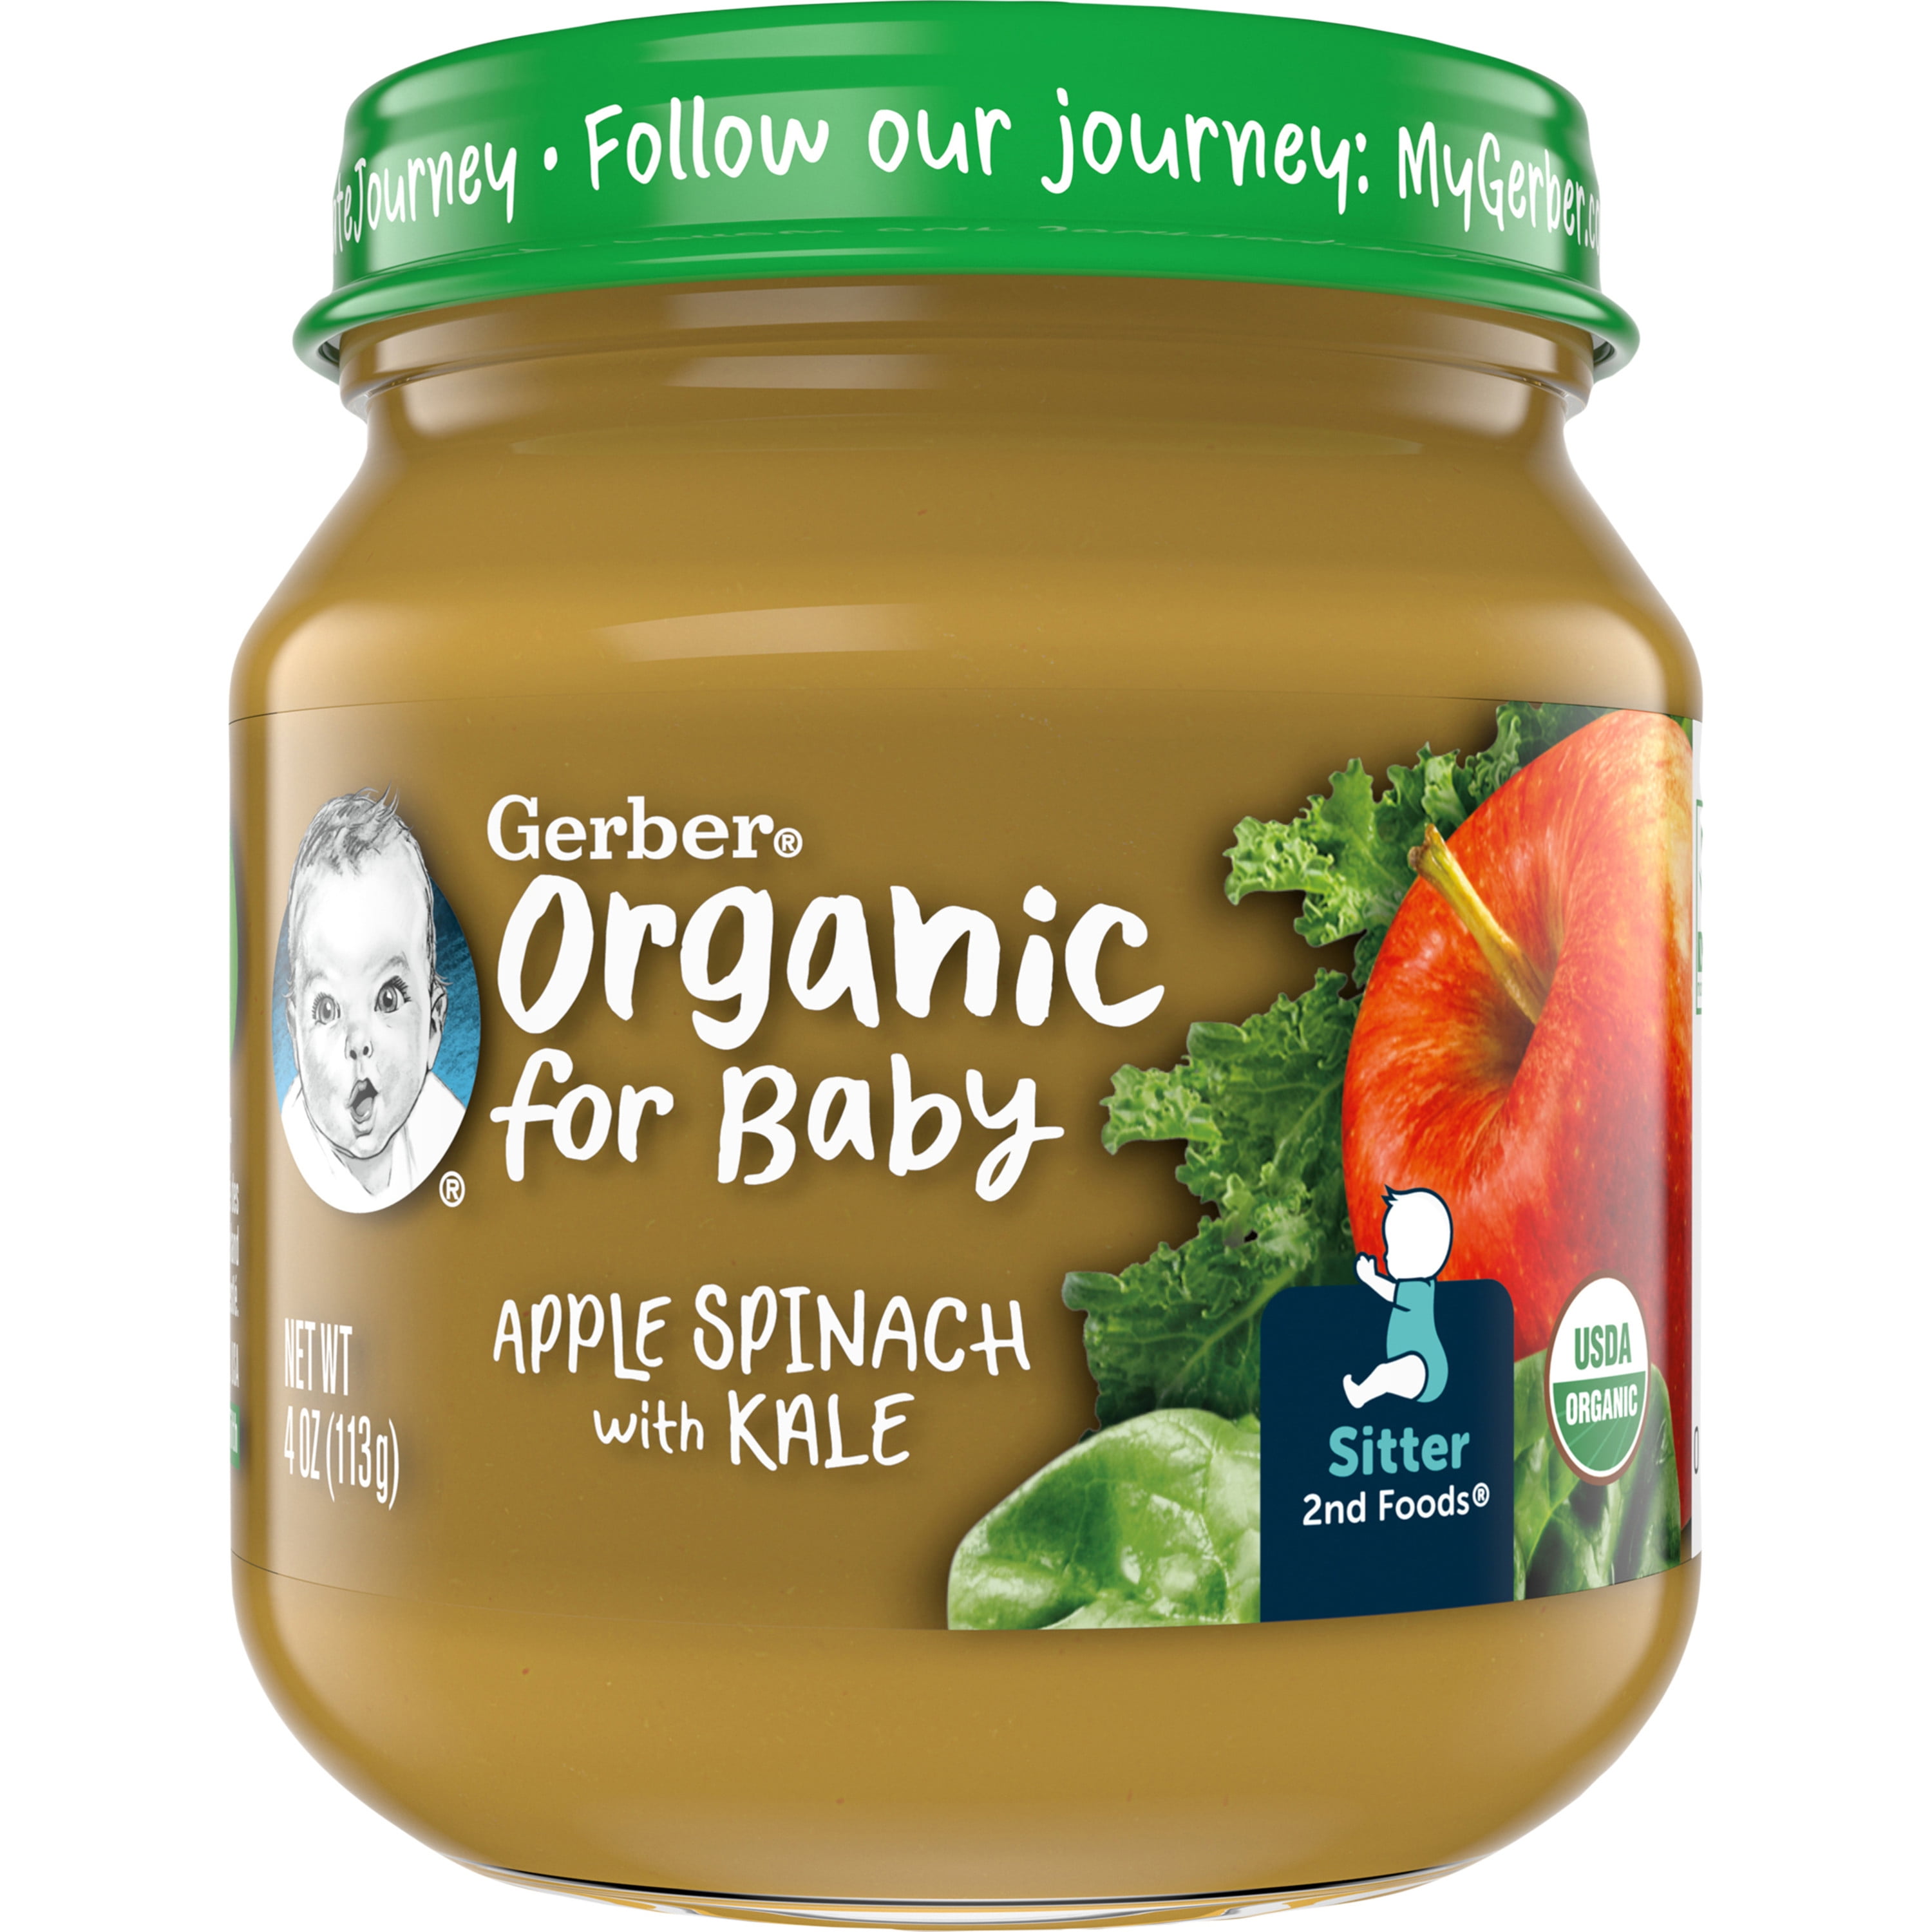 Gerber 2nd Foods Organic for Baby Baby Food, Apple Spinach Kale, 4 oz Jar